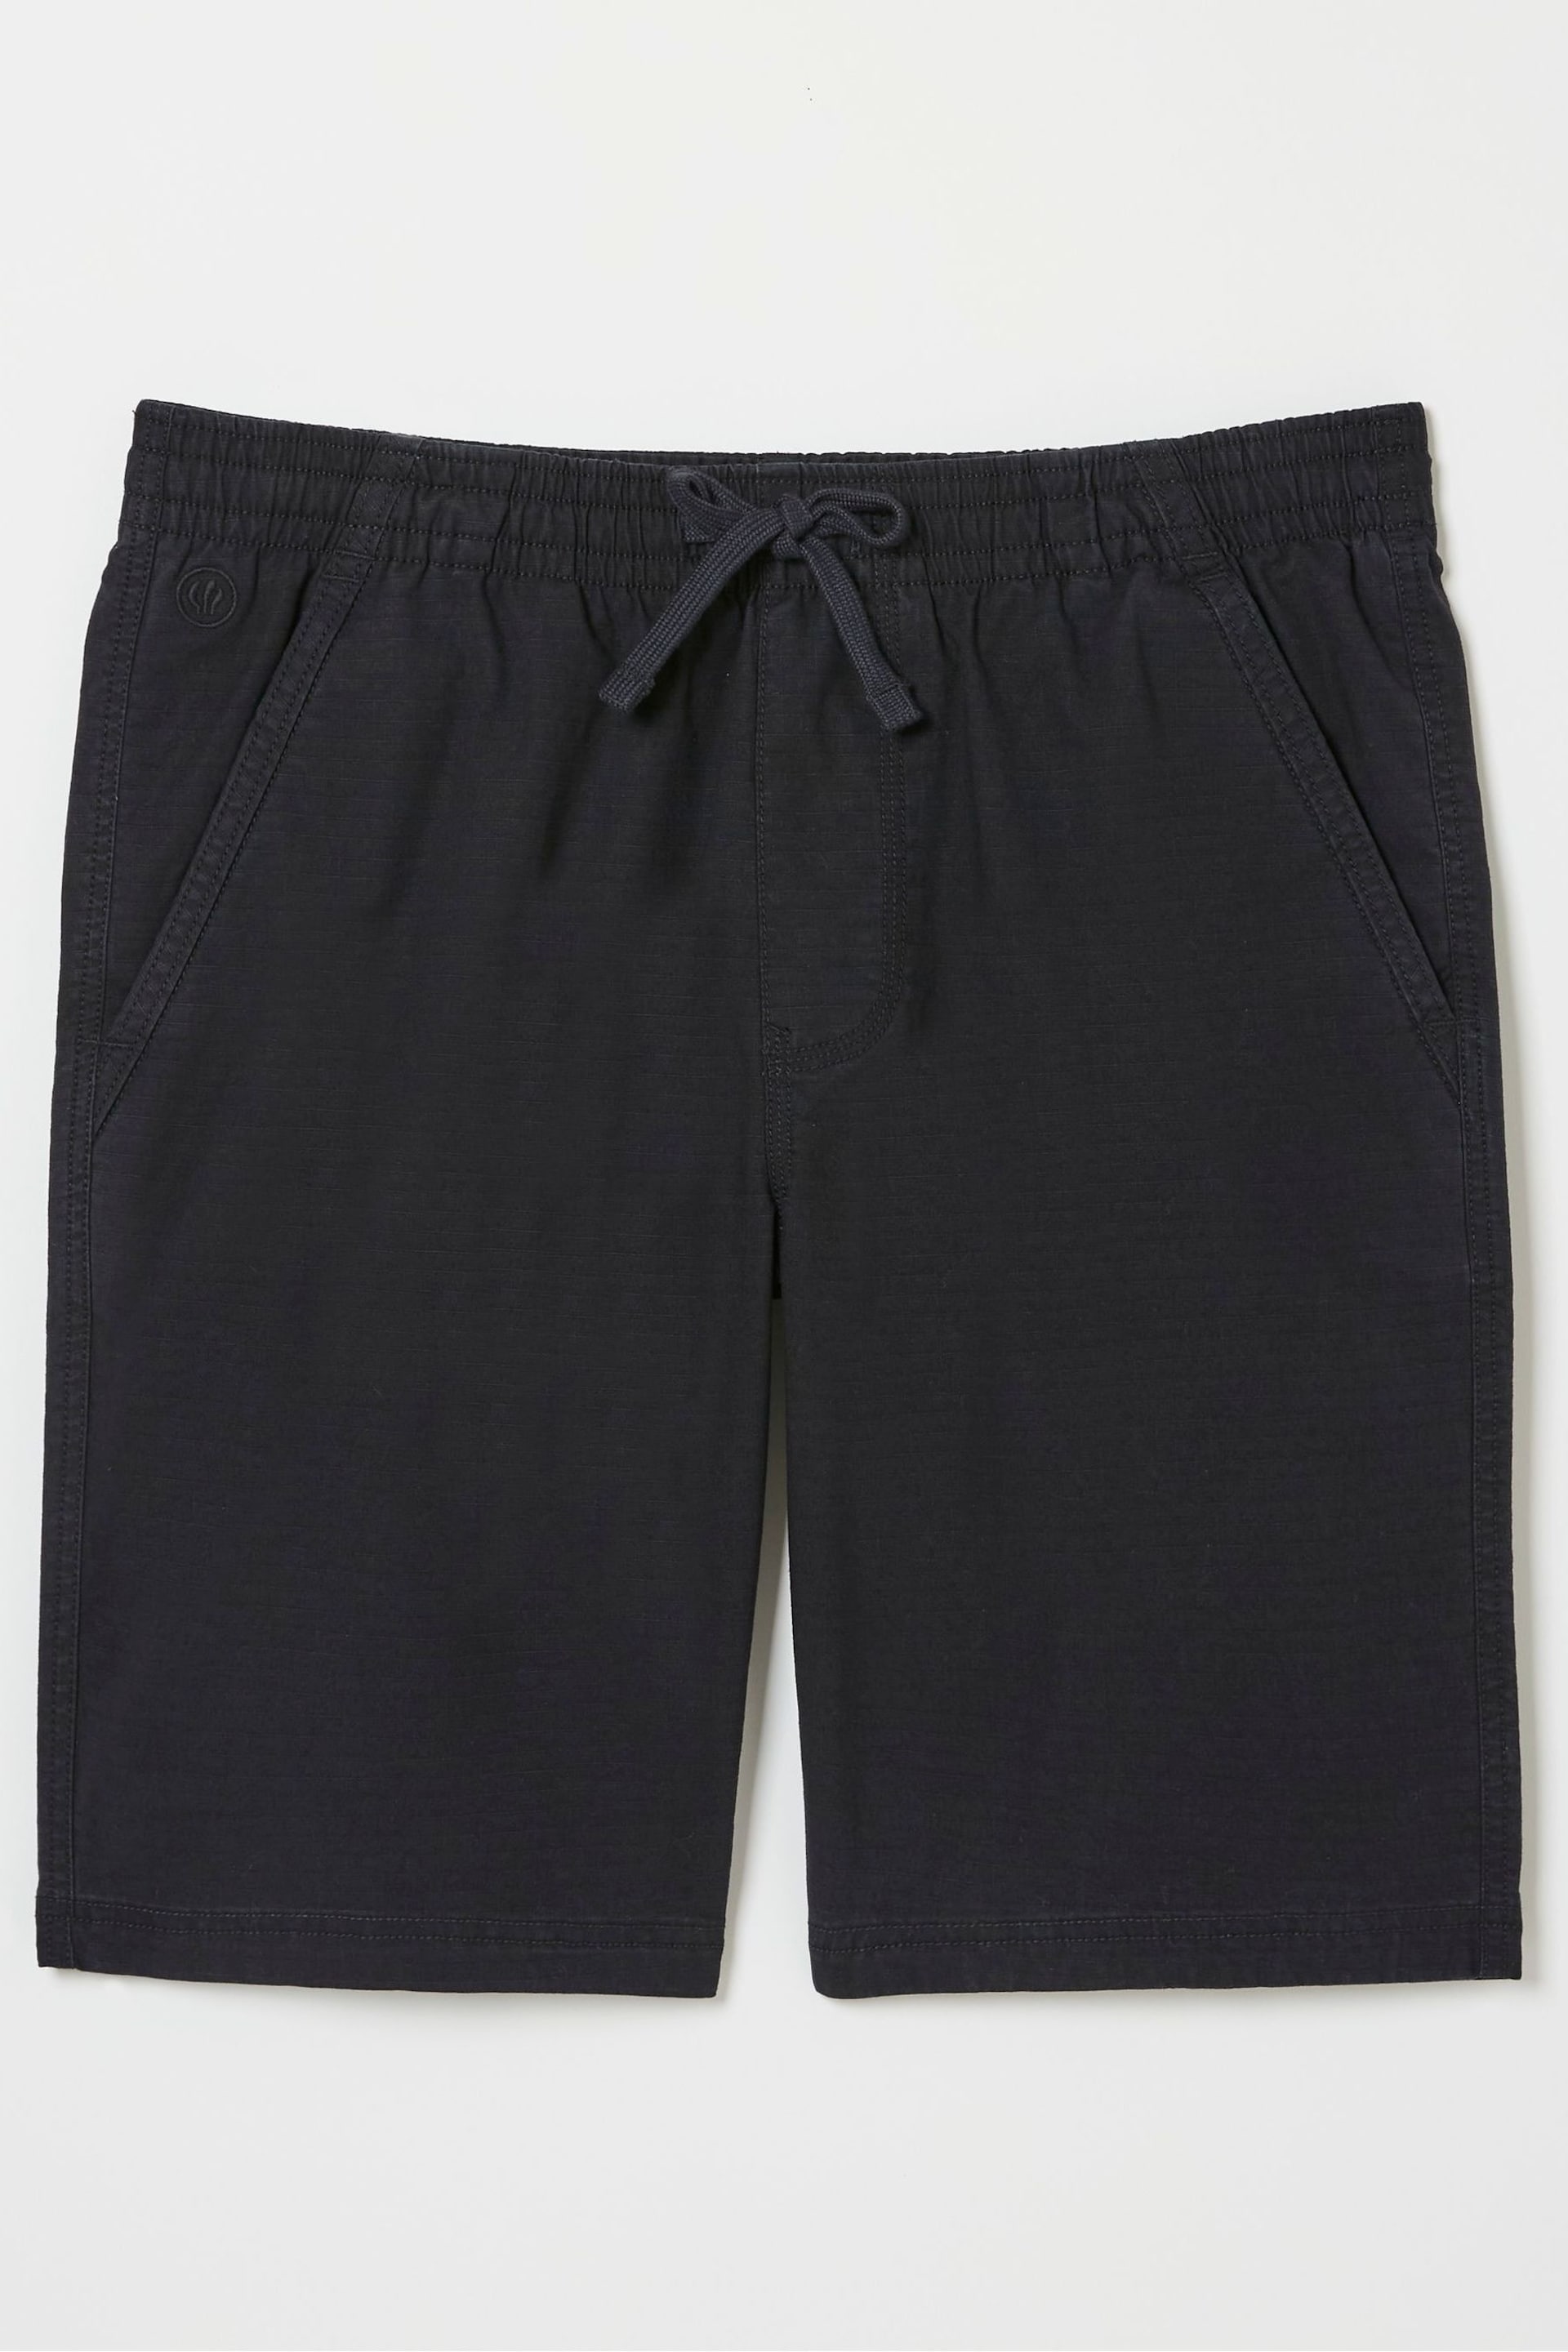 FatFace Black Seaton Ripstop Pull On Shorts - Image 5 of 5